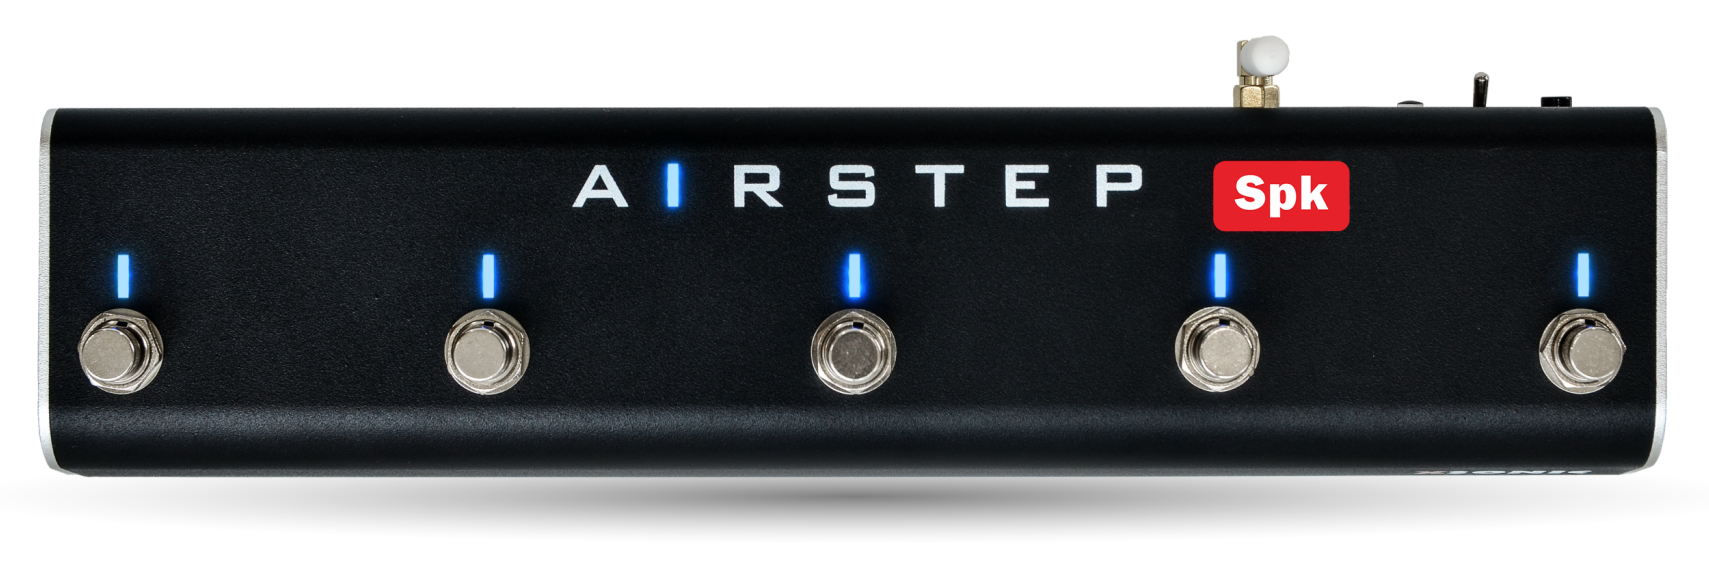 Spark Controller | AIRSTEP Spk Edition – XSONIC